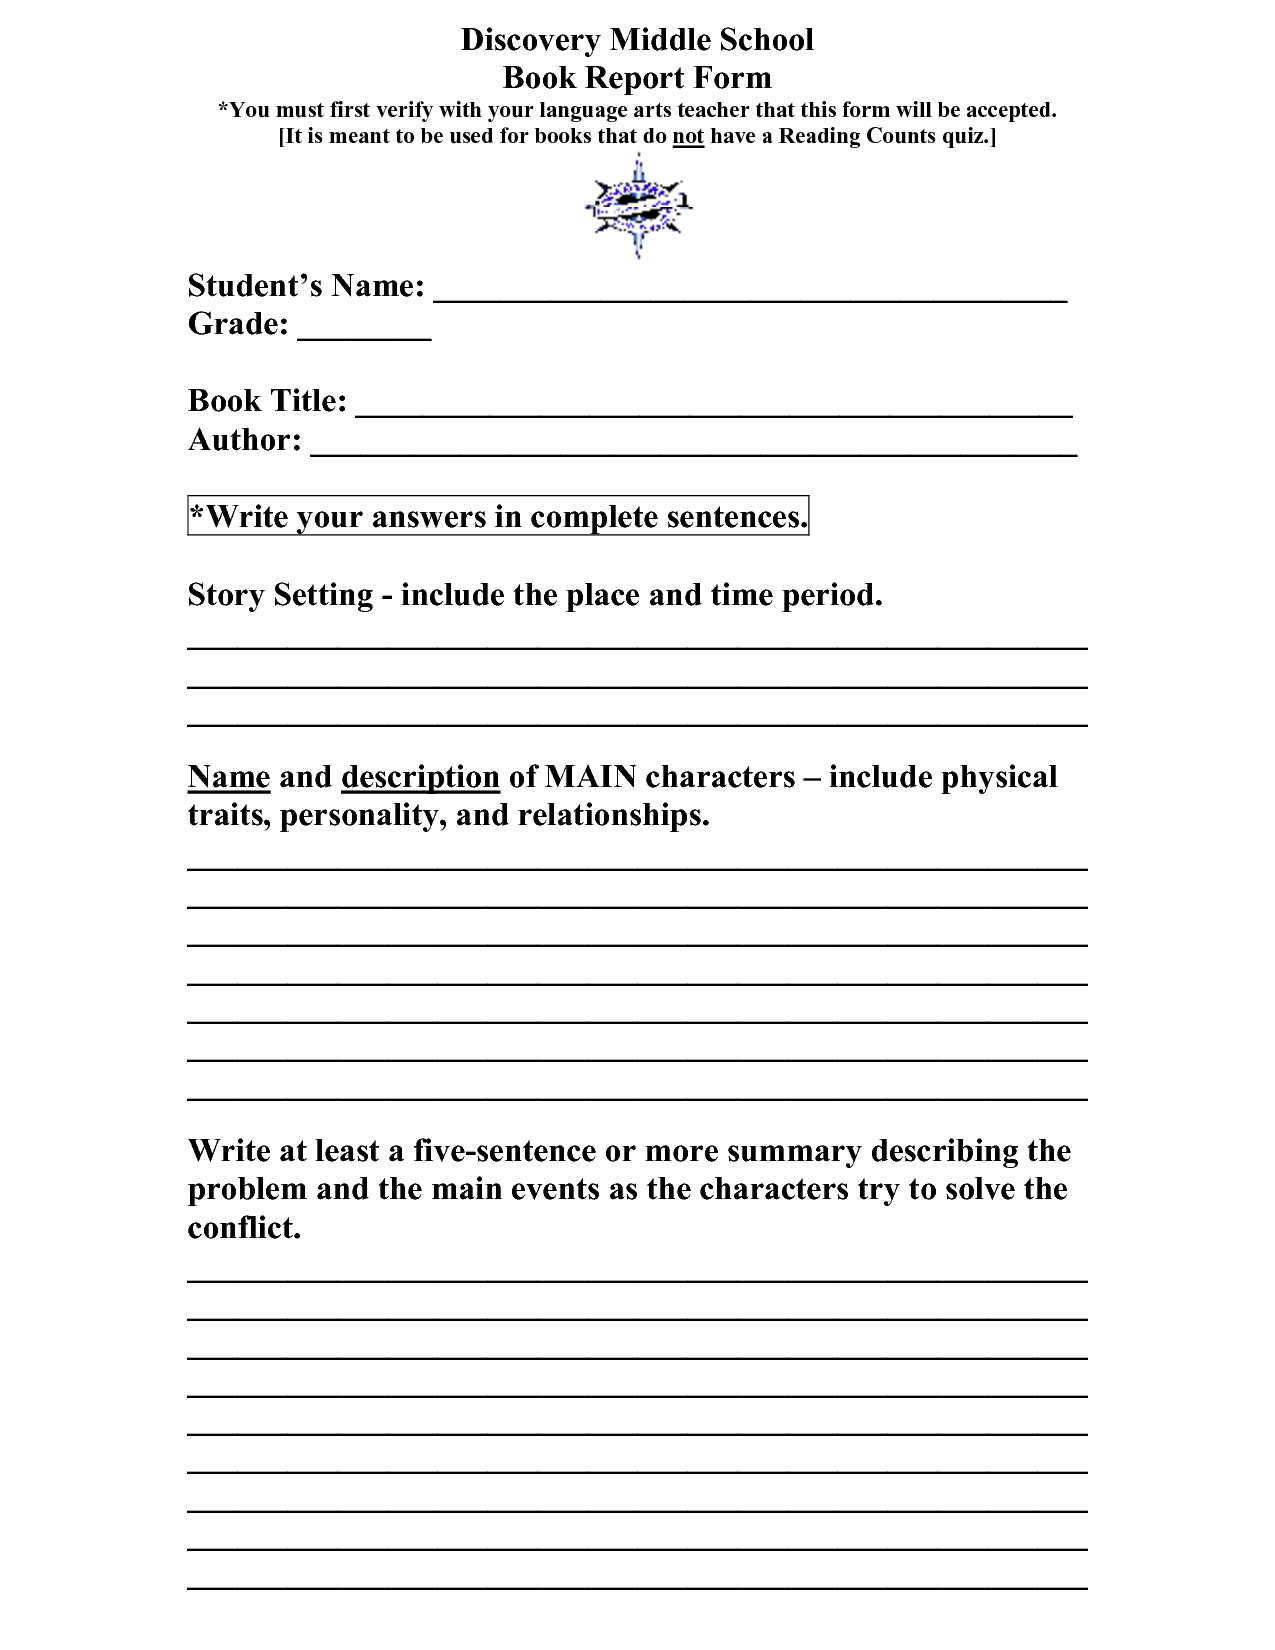 Scope Of Work Template | Teaching & Learning | High School Pertaining To High School Book Report Template